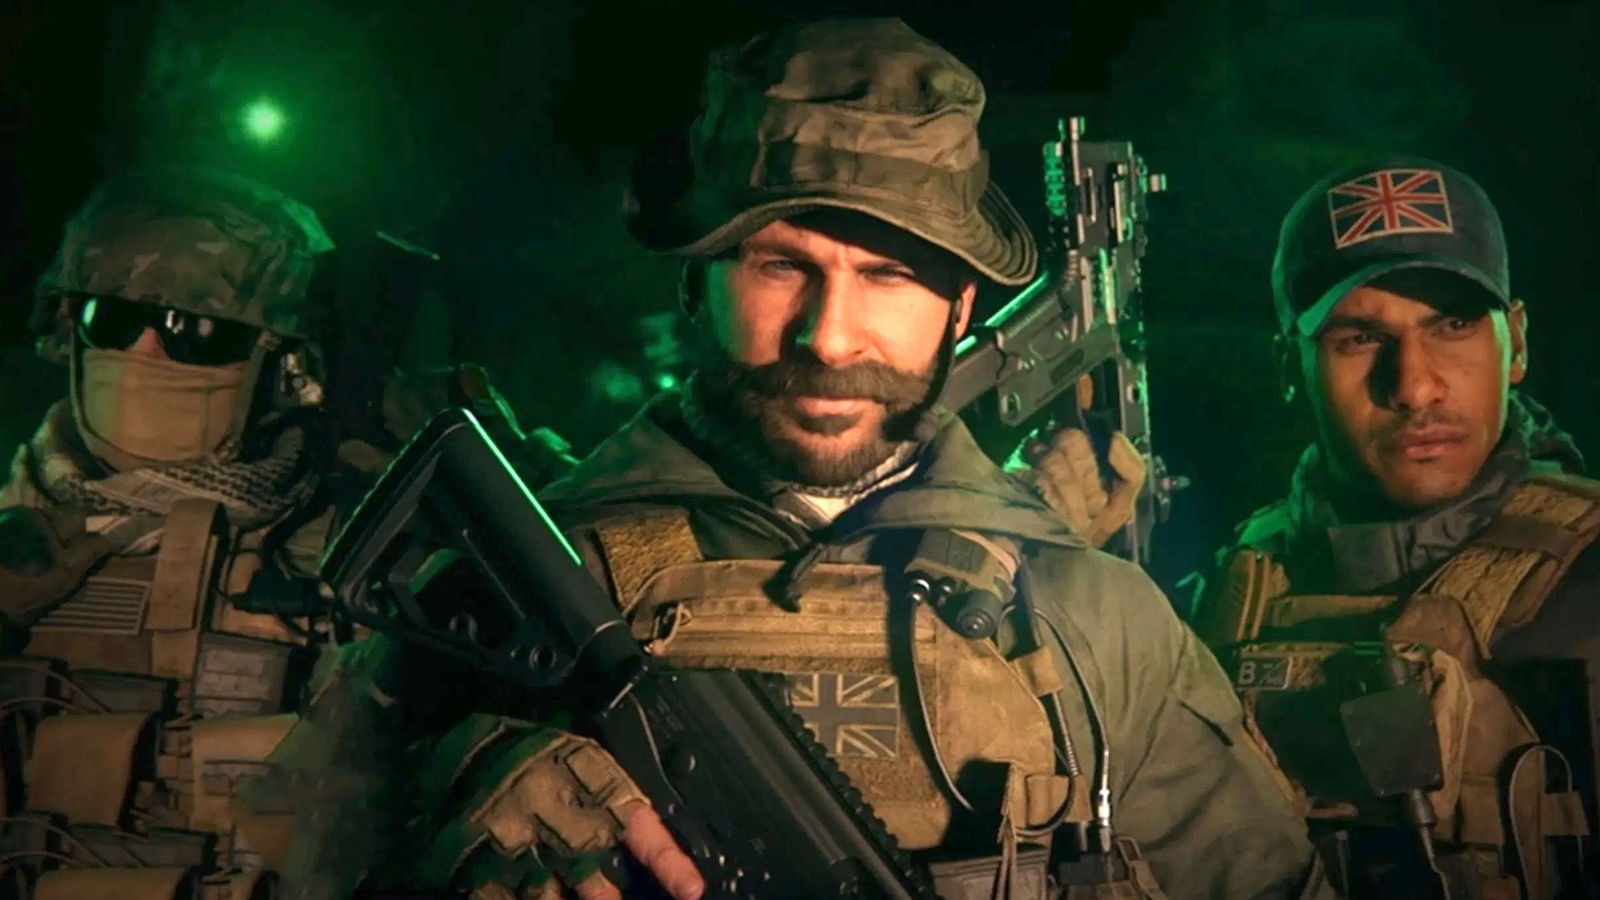 New Call of Duty: Modern Warfare Remastered Screenshots Emerge Online  Showing Impressive Texture Detail and Lighting